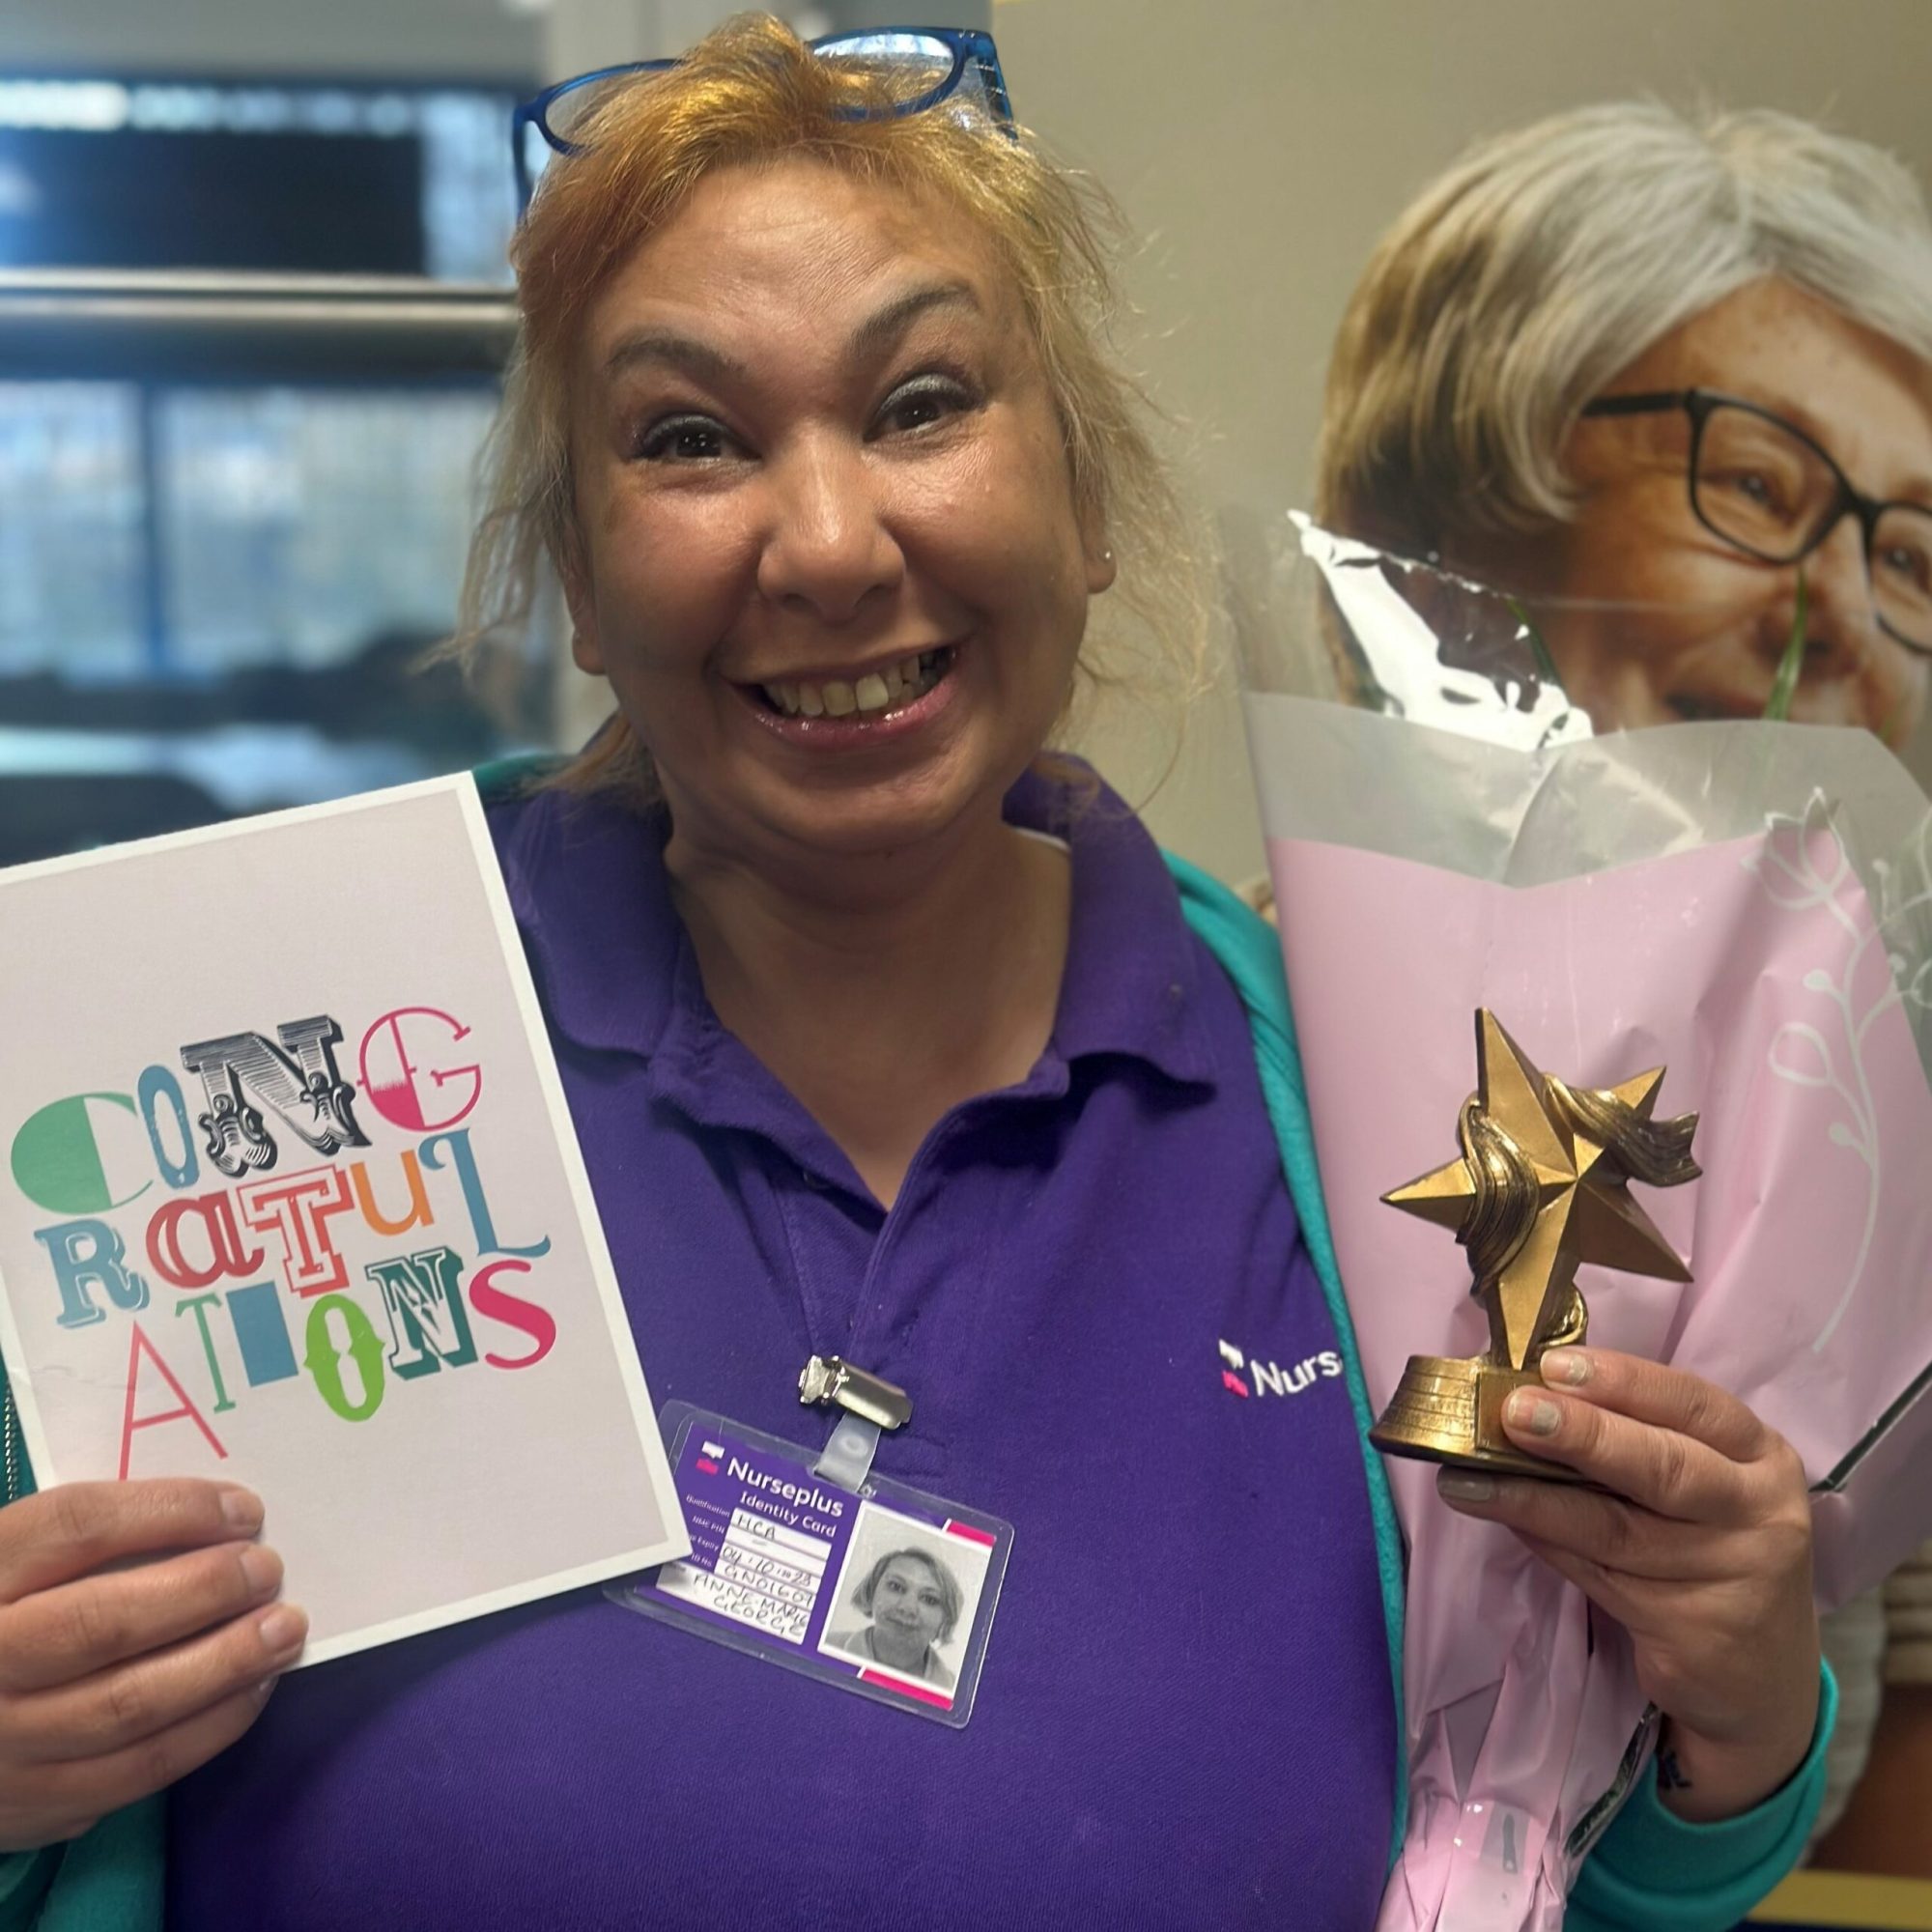 Star Carer for January: Anne-Marie George from Nurseplus